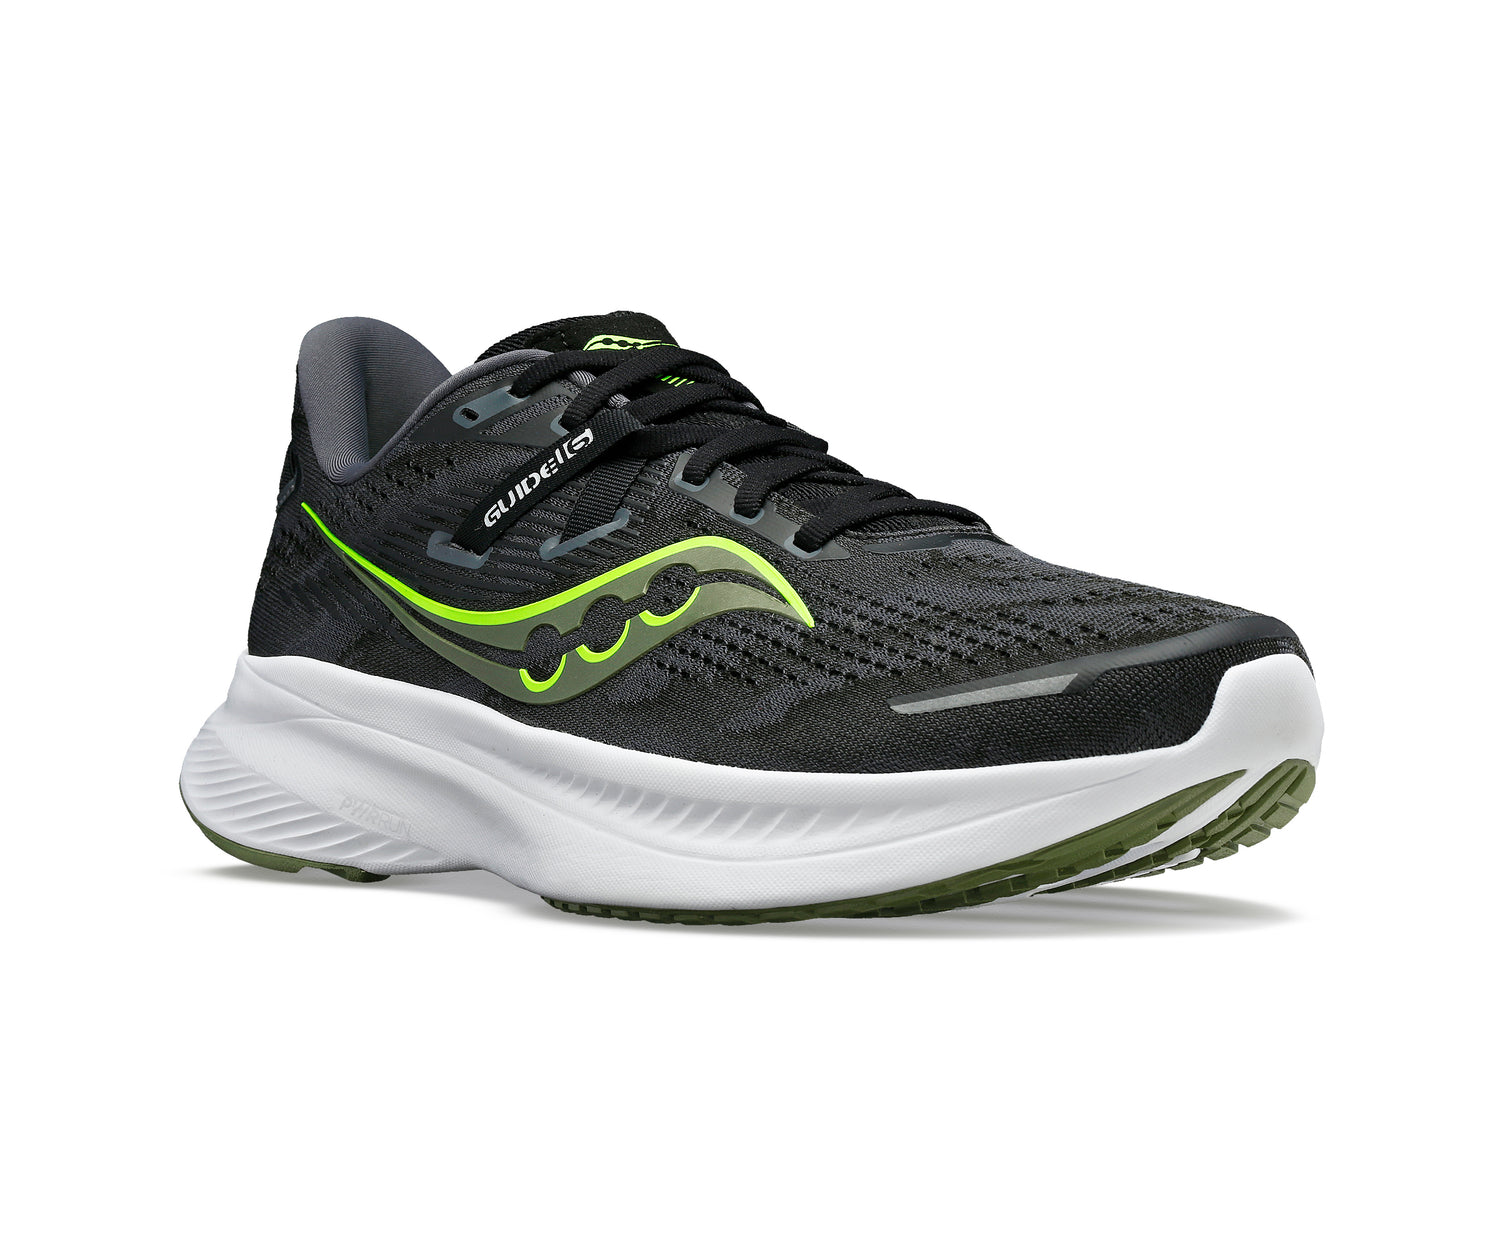 Saucony Men's Guide 16 Running Shoes Black/Glade